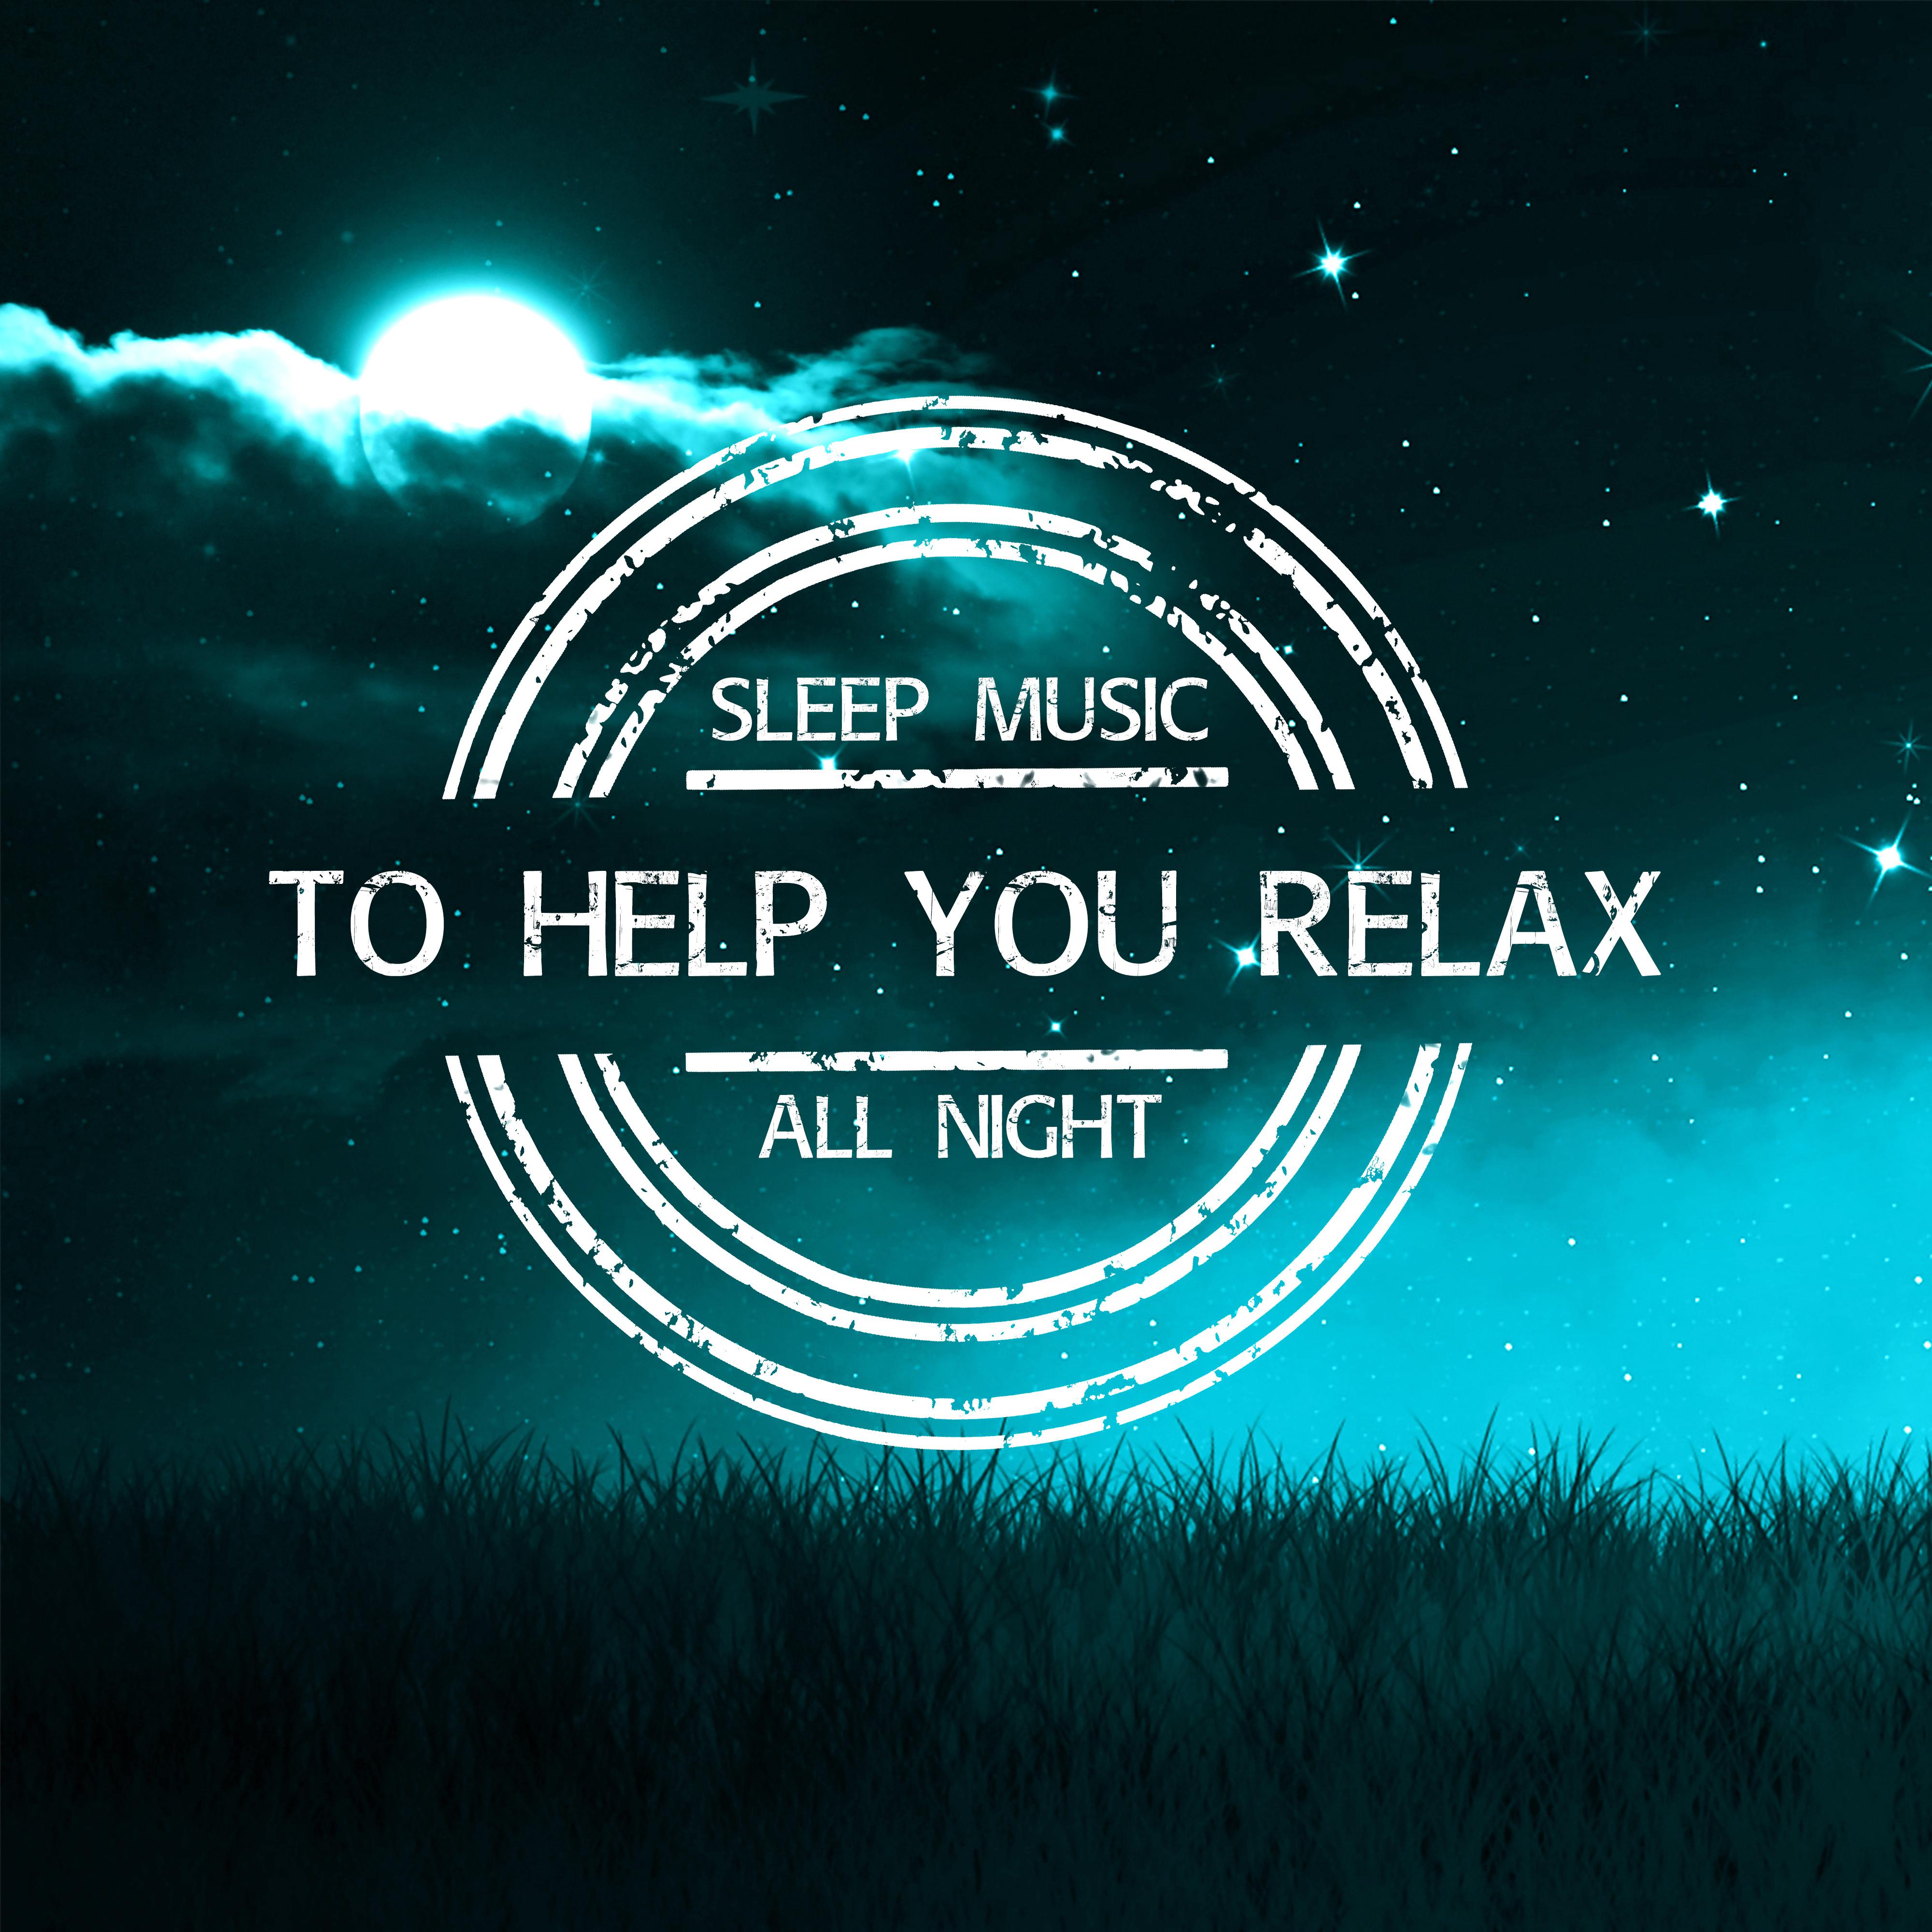 Sleep Music to Help You Relax all Night - Ocean Waves Sounds, Calming Quiet Nature Sounds, White Noise, Insomnia Cure